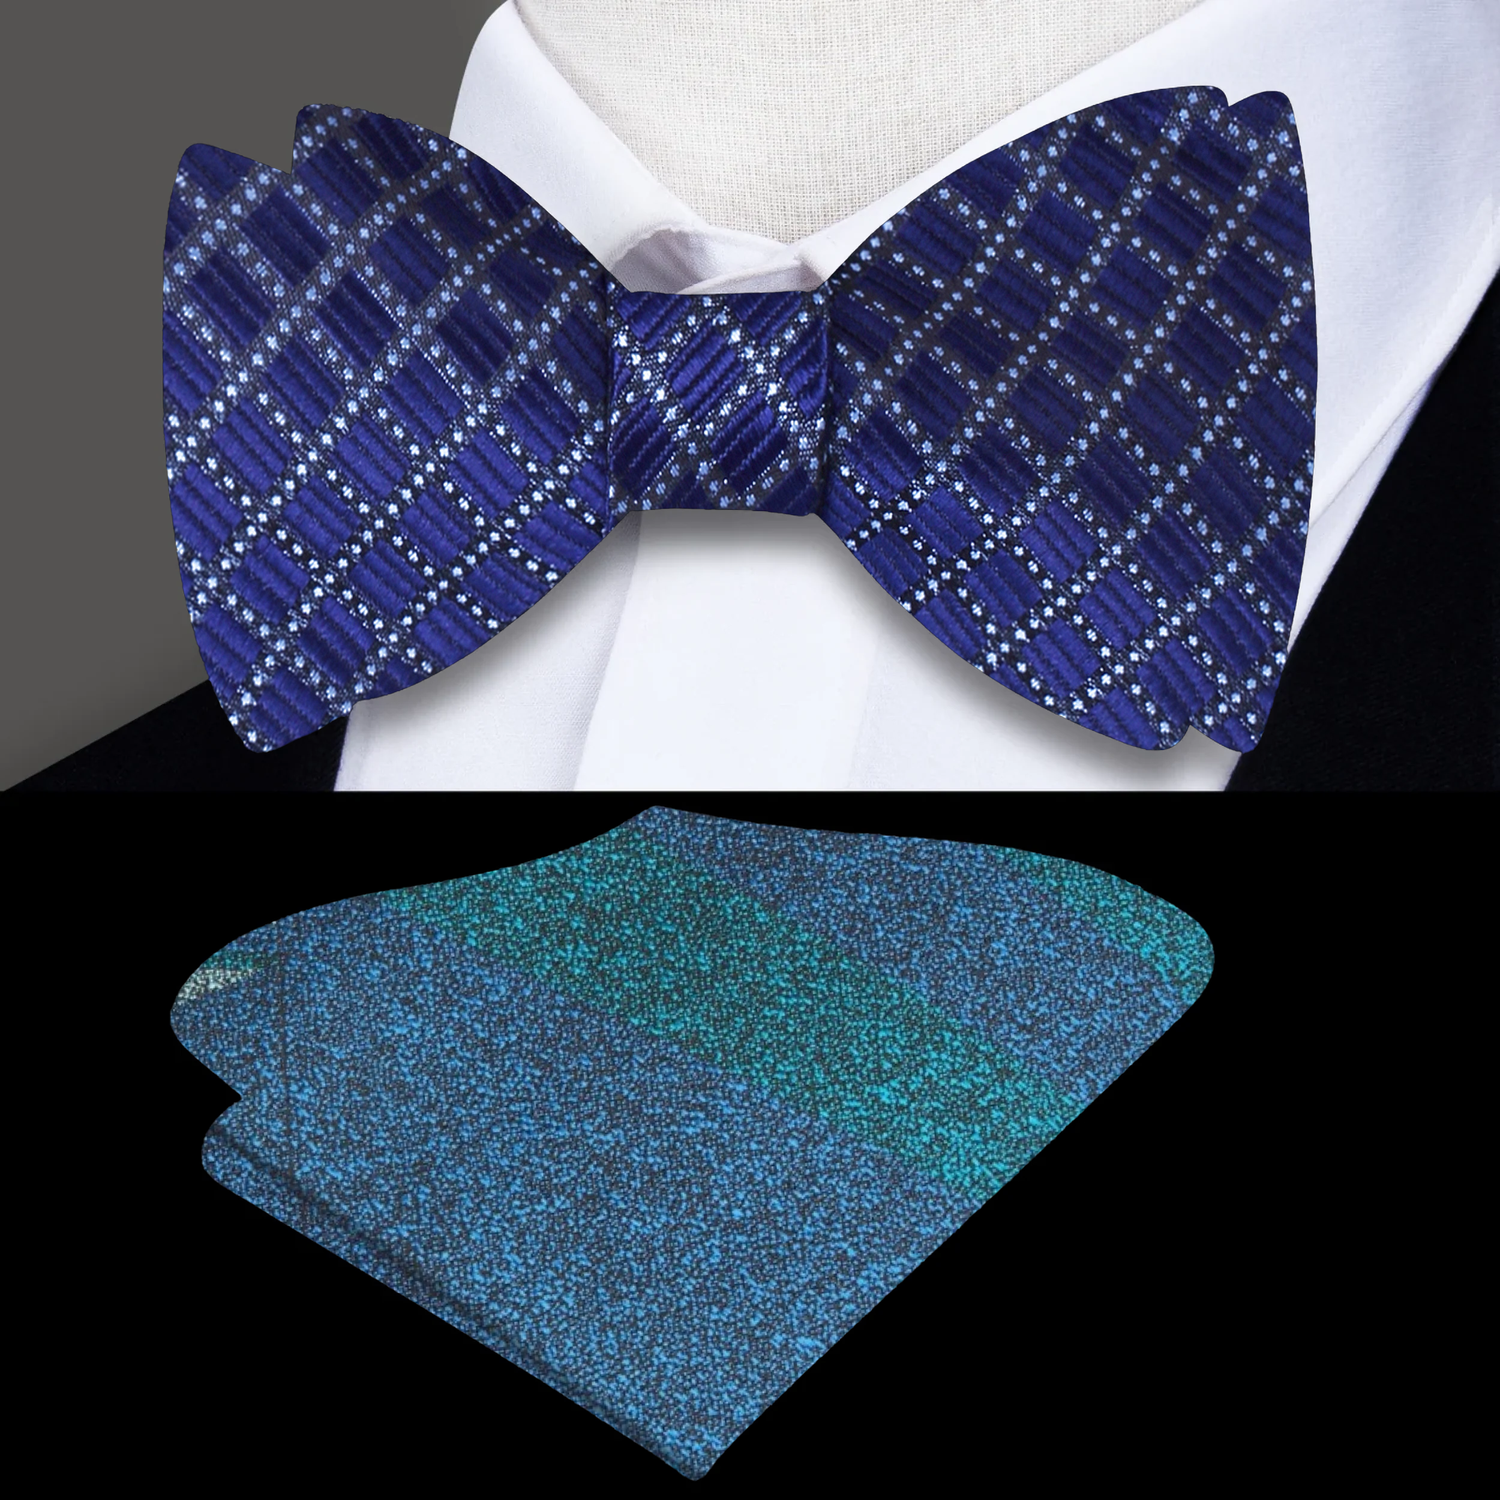 A Blue Small Geometric Check Pattern Silk Self Tie Bow Tie, Accenting Pocket Square